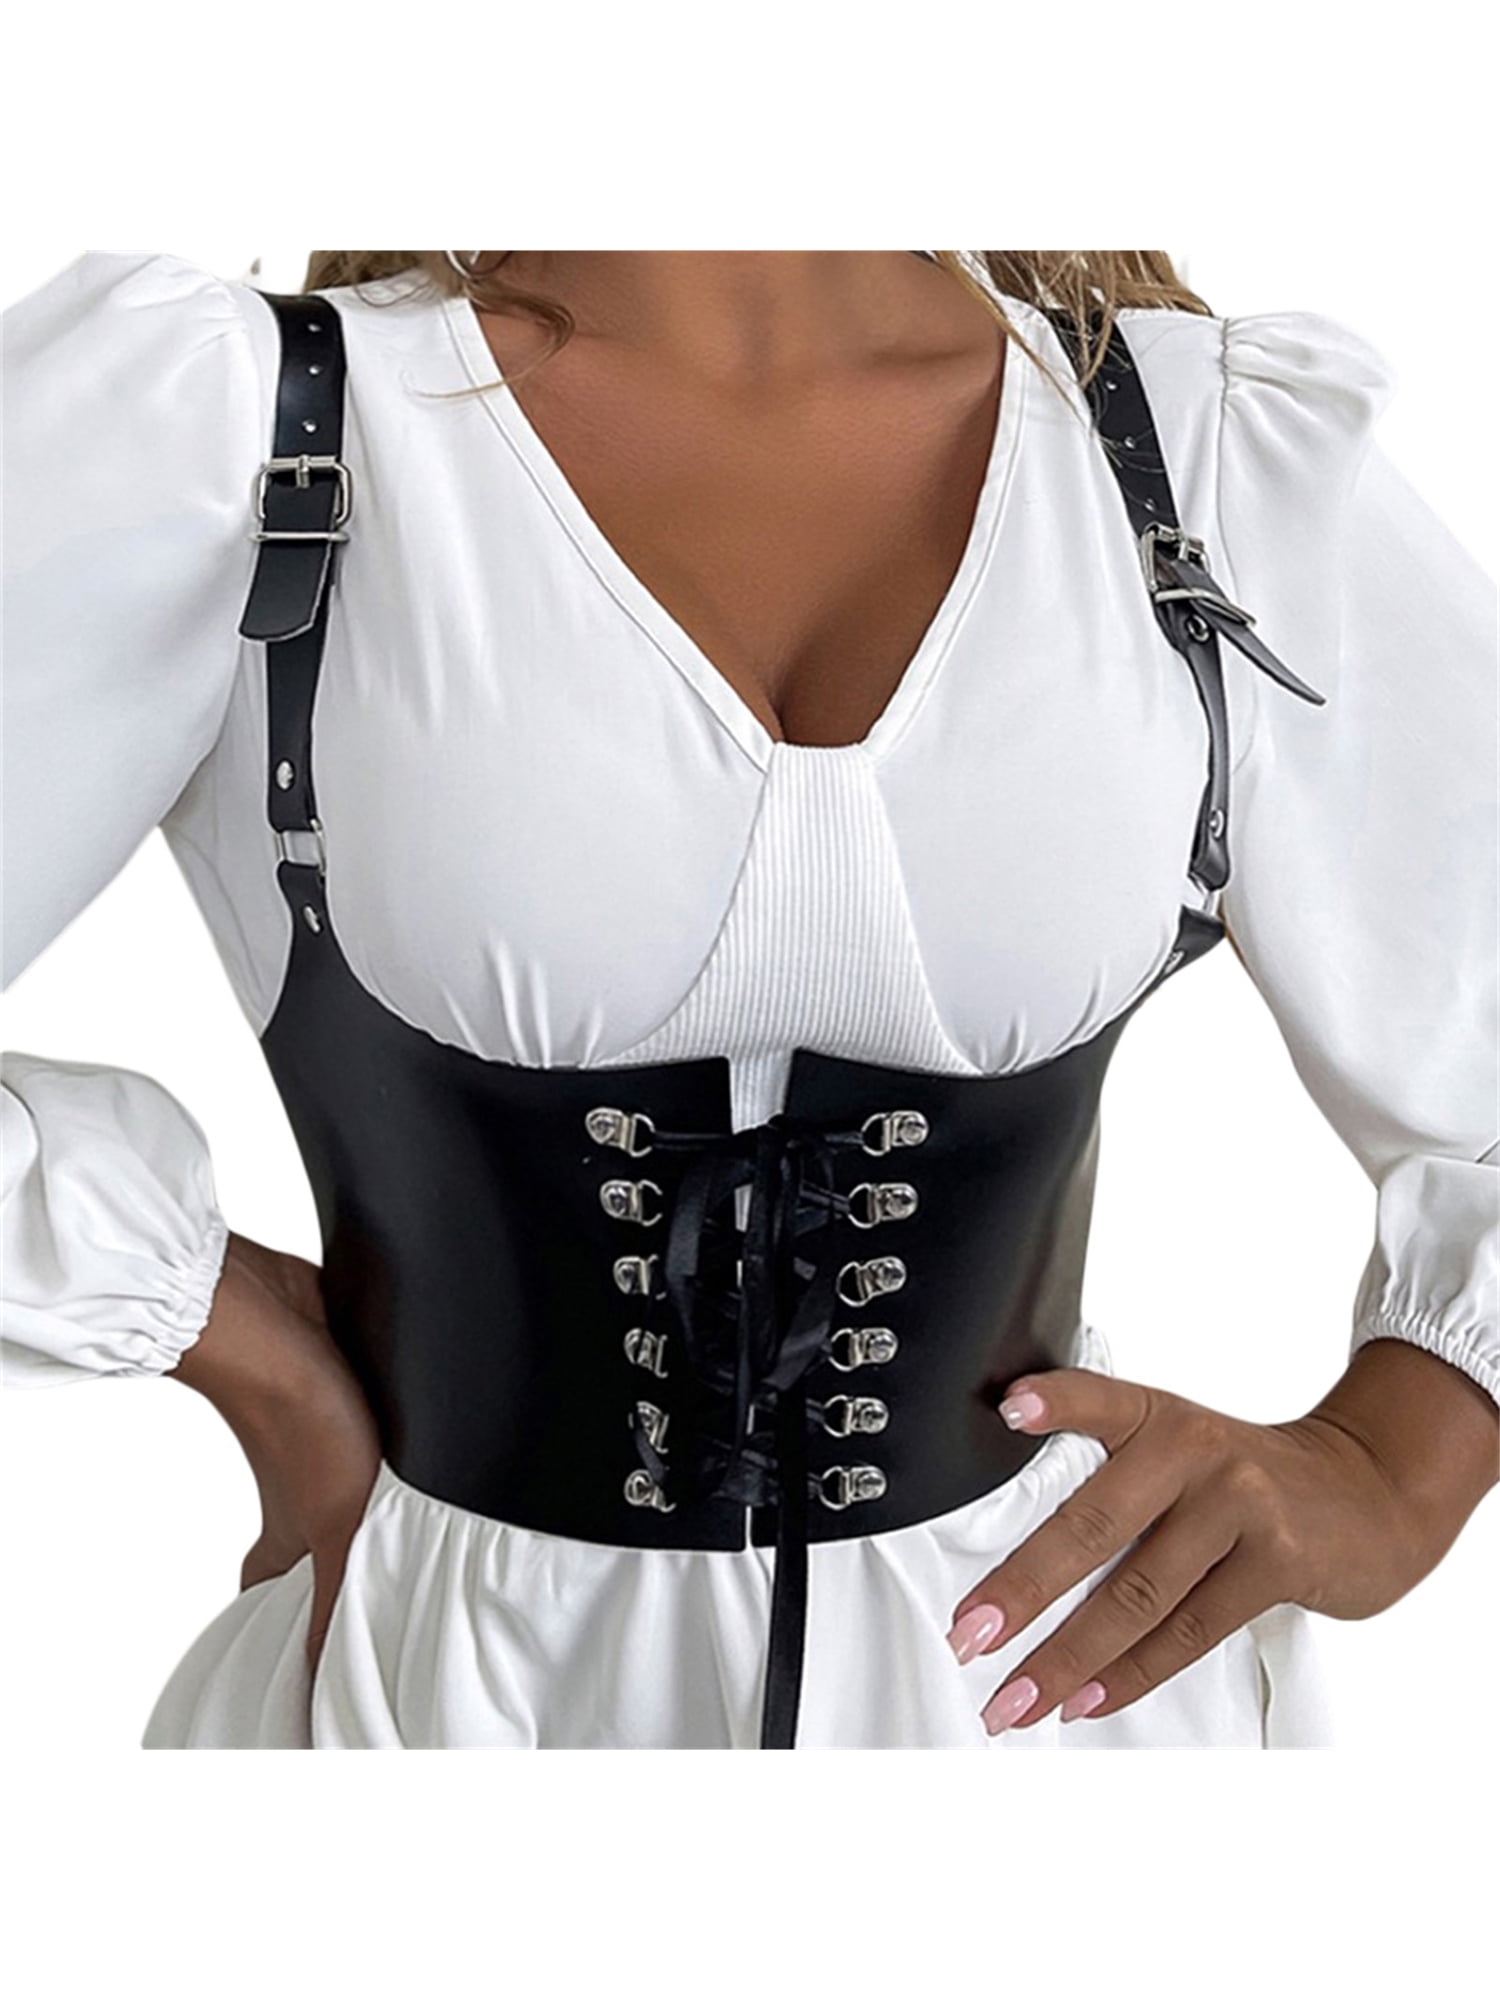 Womens Gothic Punk PU Leather Chest Support Vest Black Bustier Crop Top Metal Buckle Corset Top